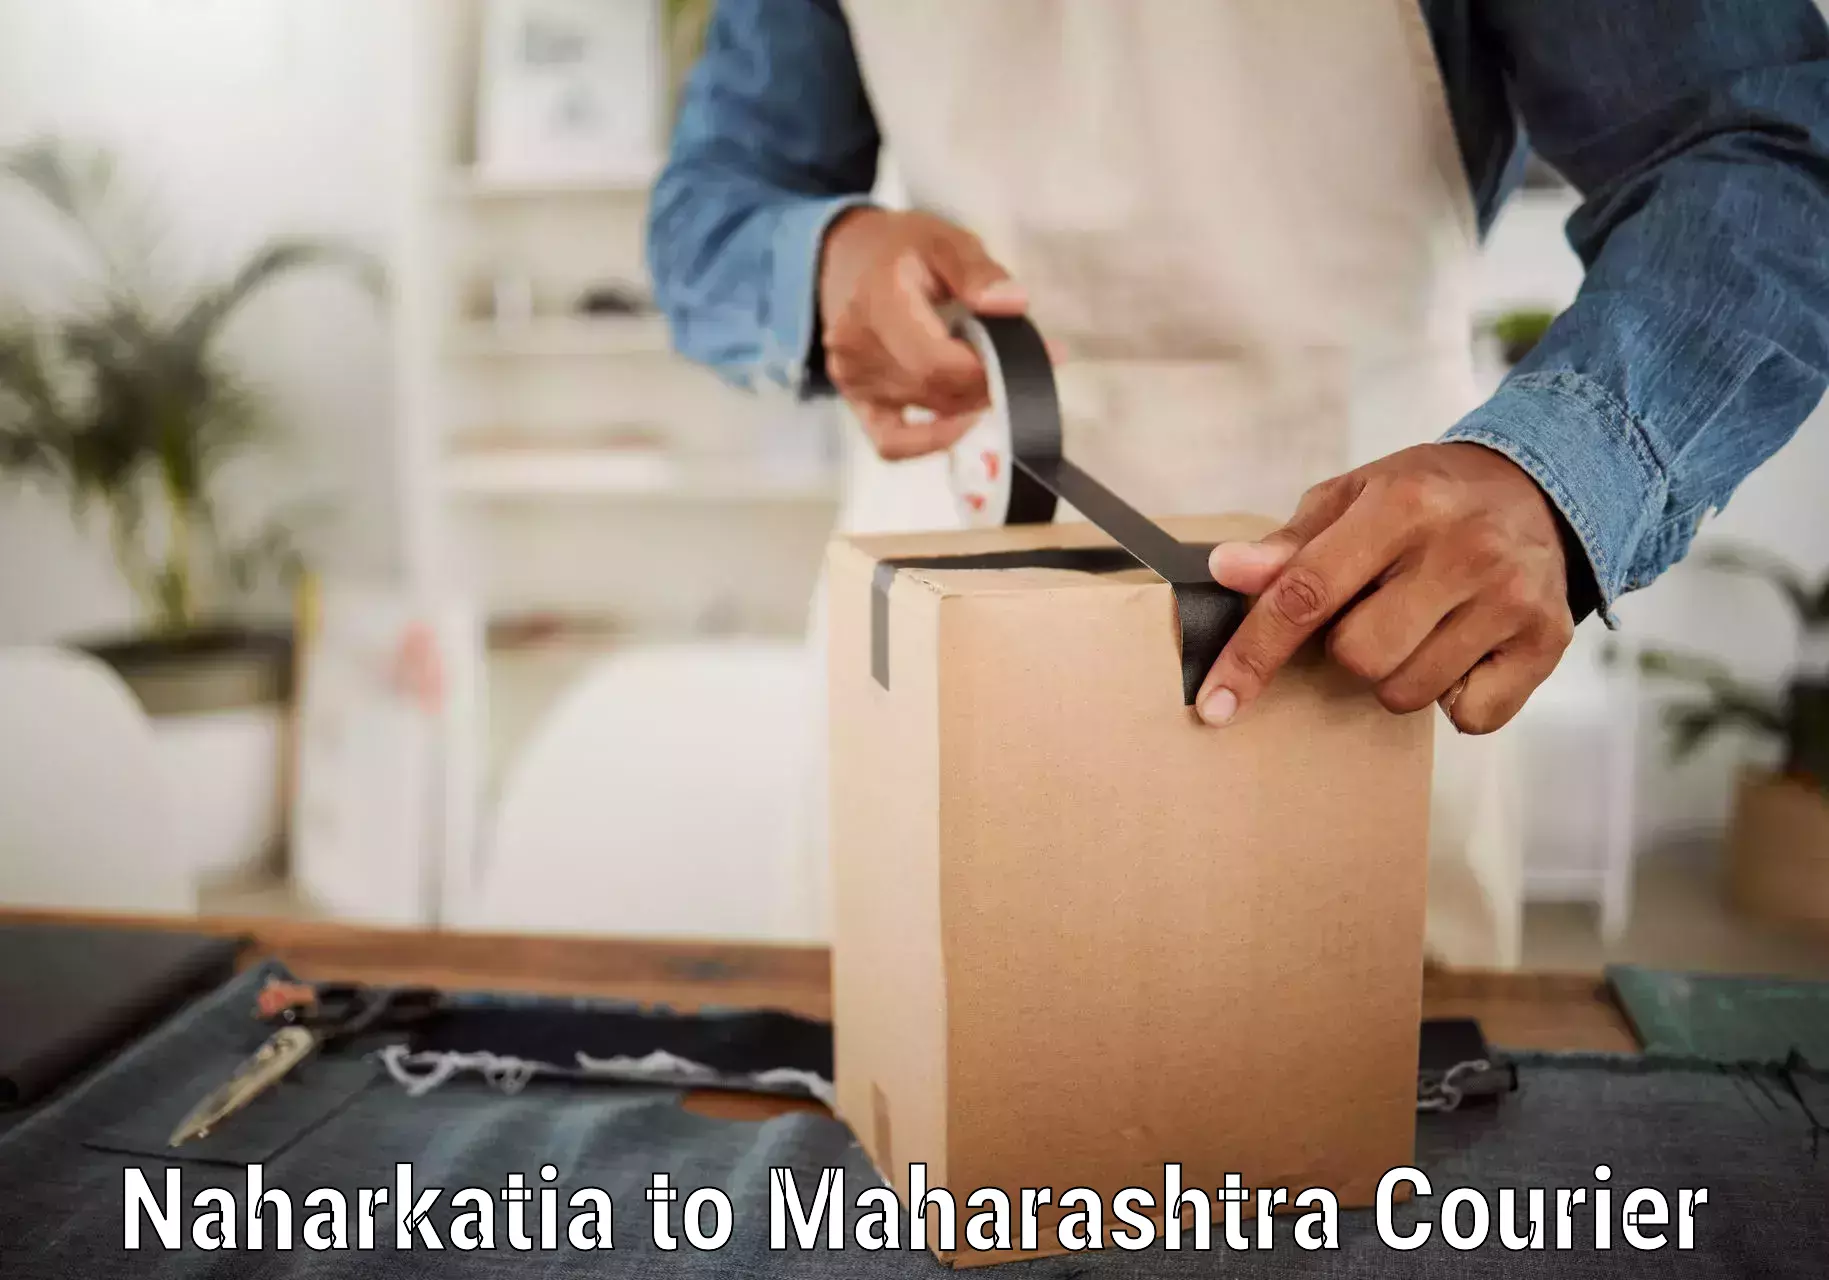 Parcel service for businesses in Naharkatia to Maharashtra